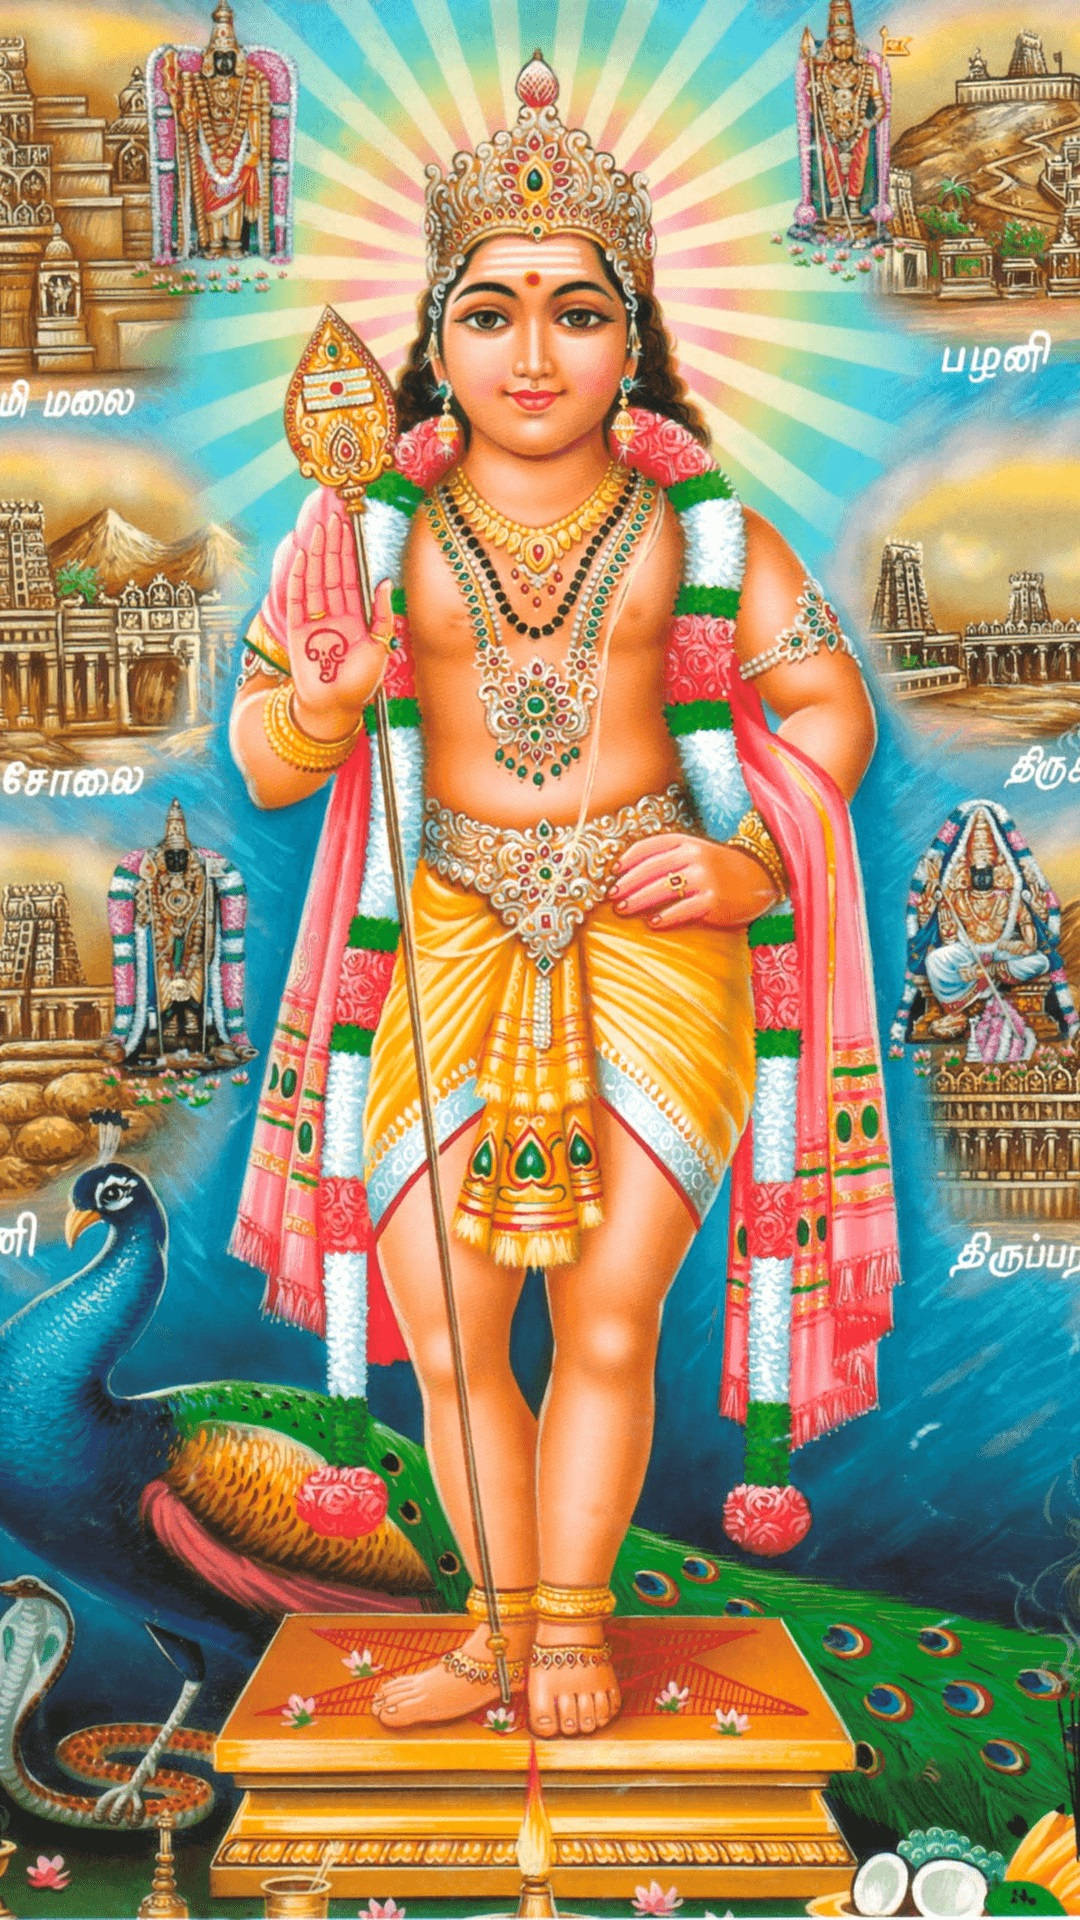 Murugan Statue With Temples And Deities Background